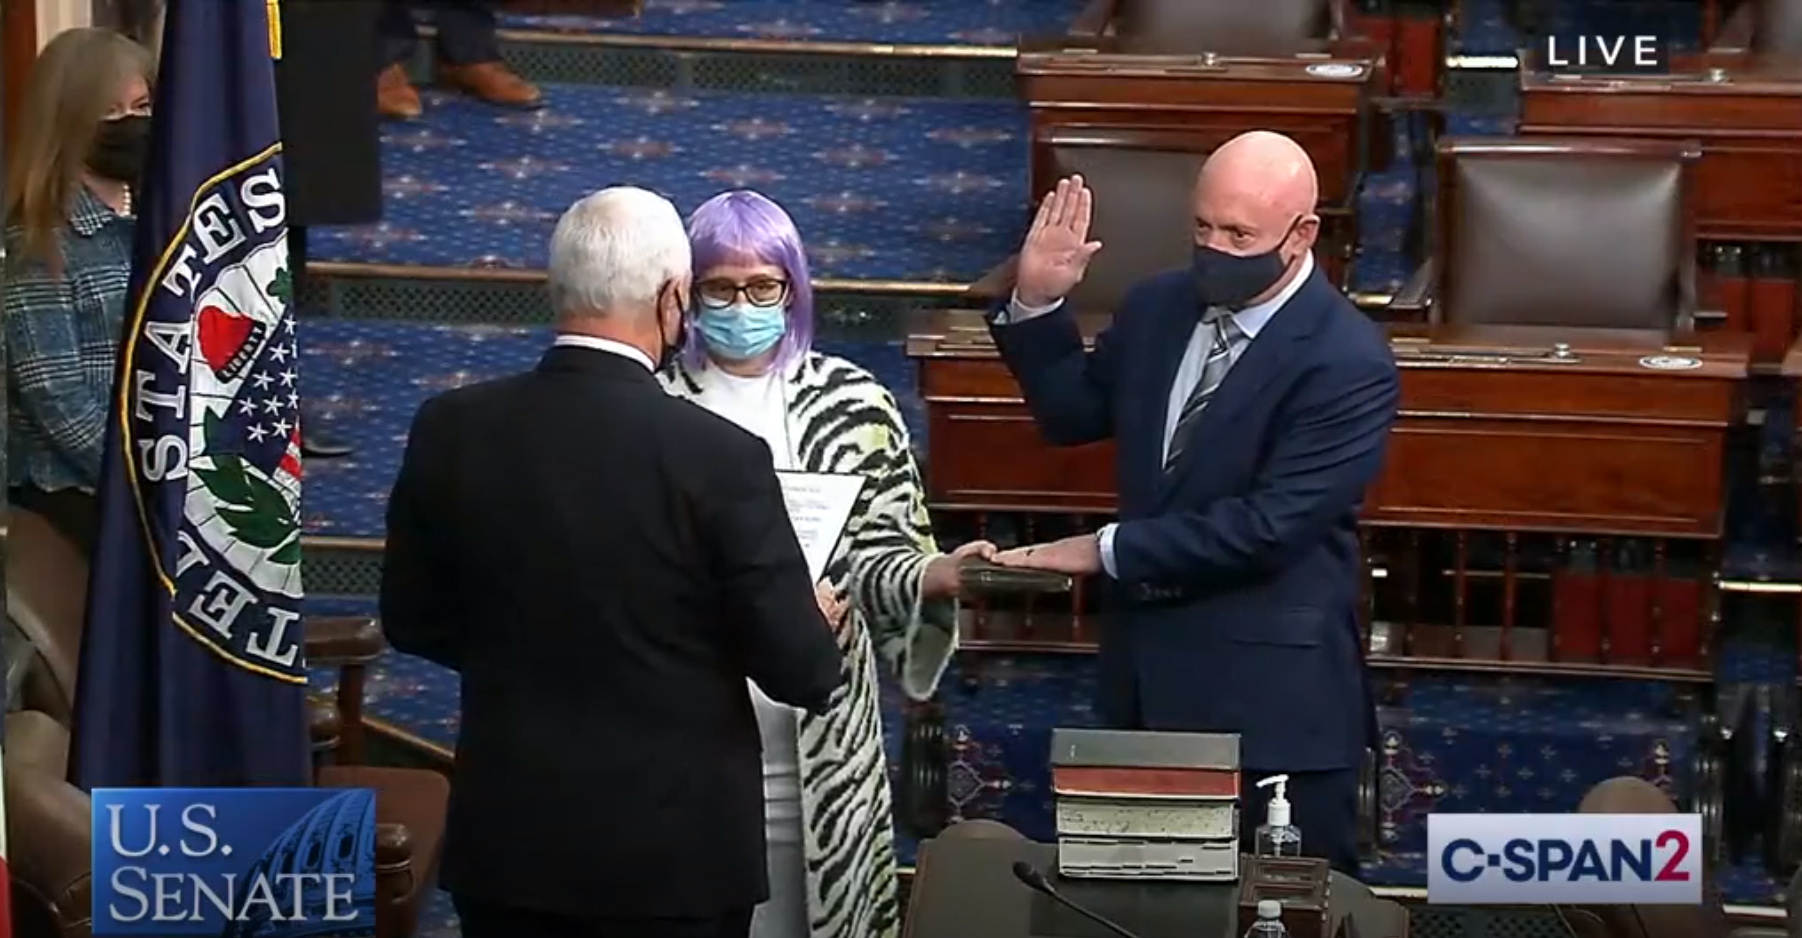 PHOTO: Mark Kelly is sworn in as Arizona's newest senator by Vice-President Mike Pence while standing next former Arizona congresswoman Gabrielle Giffords on the Senate floor in Washington, Dec. 2, 2020.